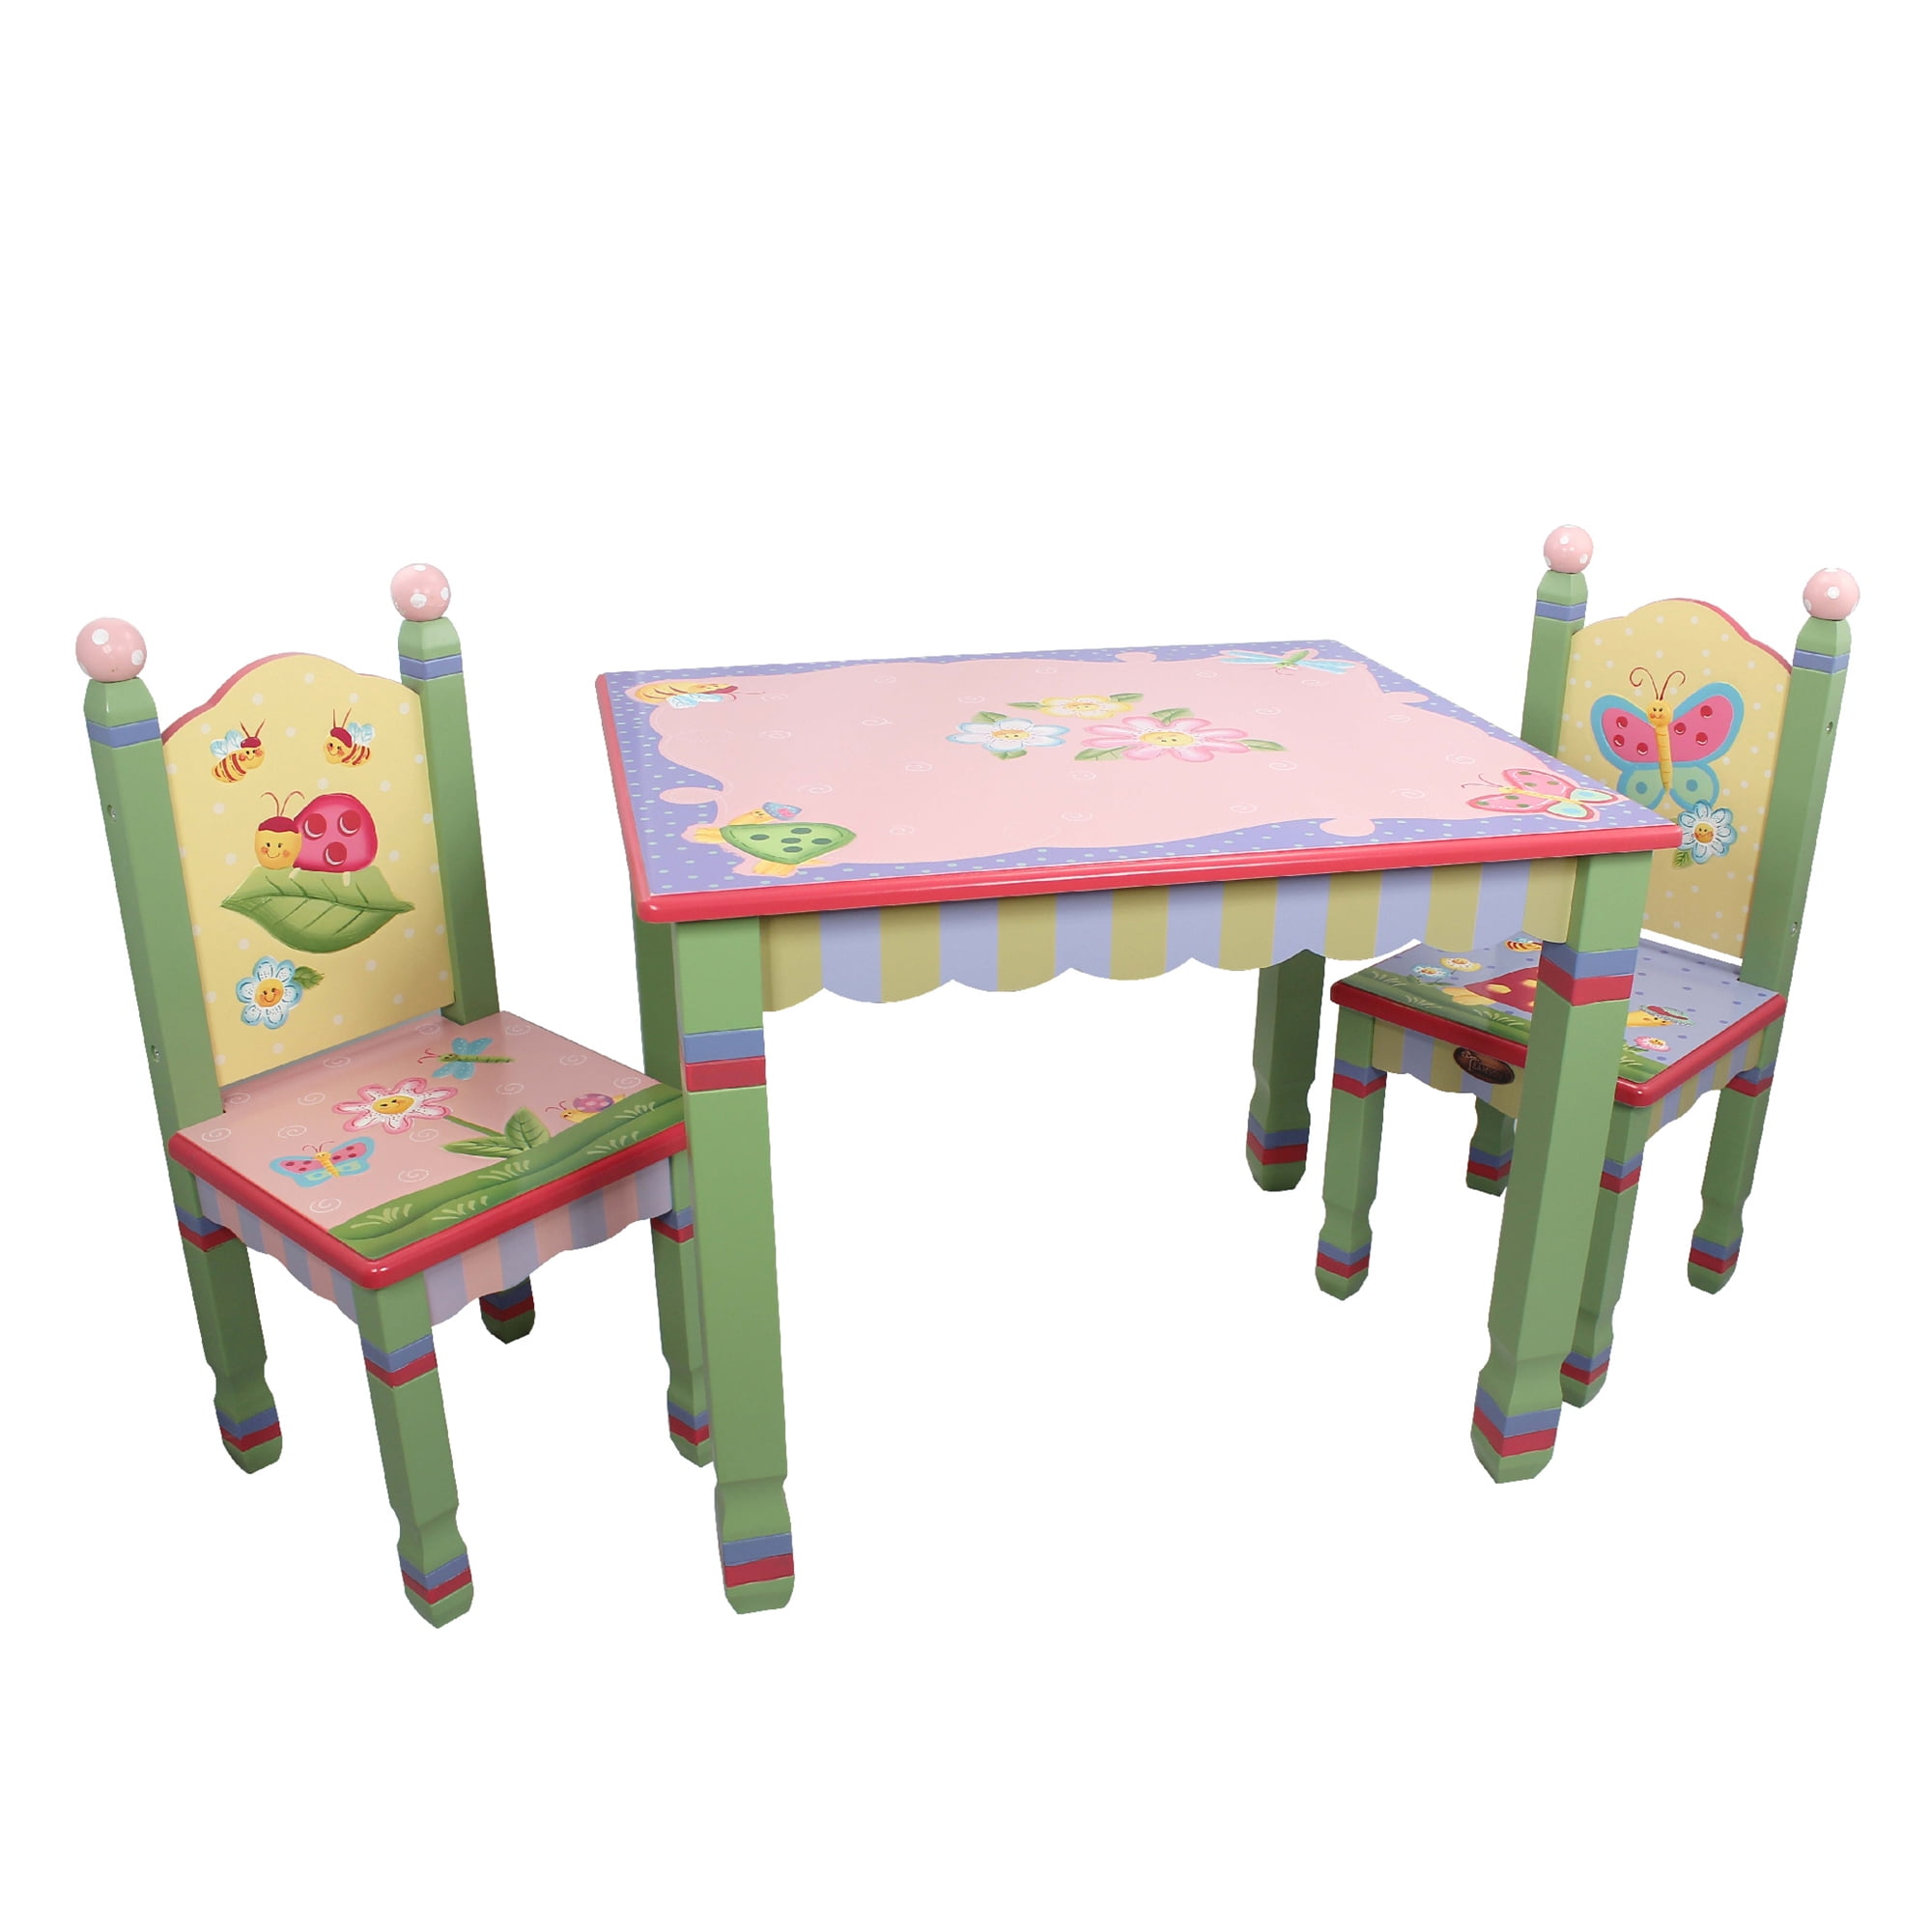 Learning Table/Kid Picnic Table/Cute Bedroom Furniture/Boy Furniture/Baby Girl Table Set/Kid Desk Chair Labebe Wooden Activity Table Chair Set Bird Printed White Toddler Table with Bin for 1-5 Years